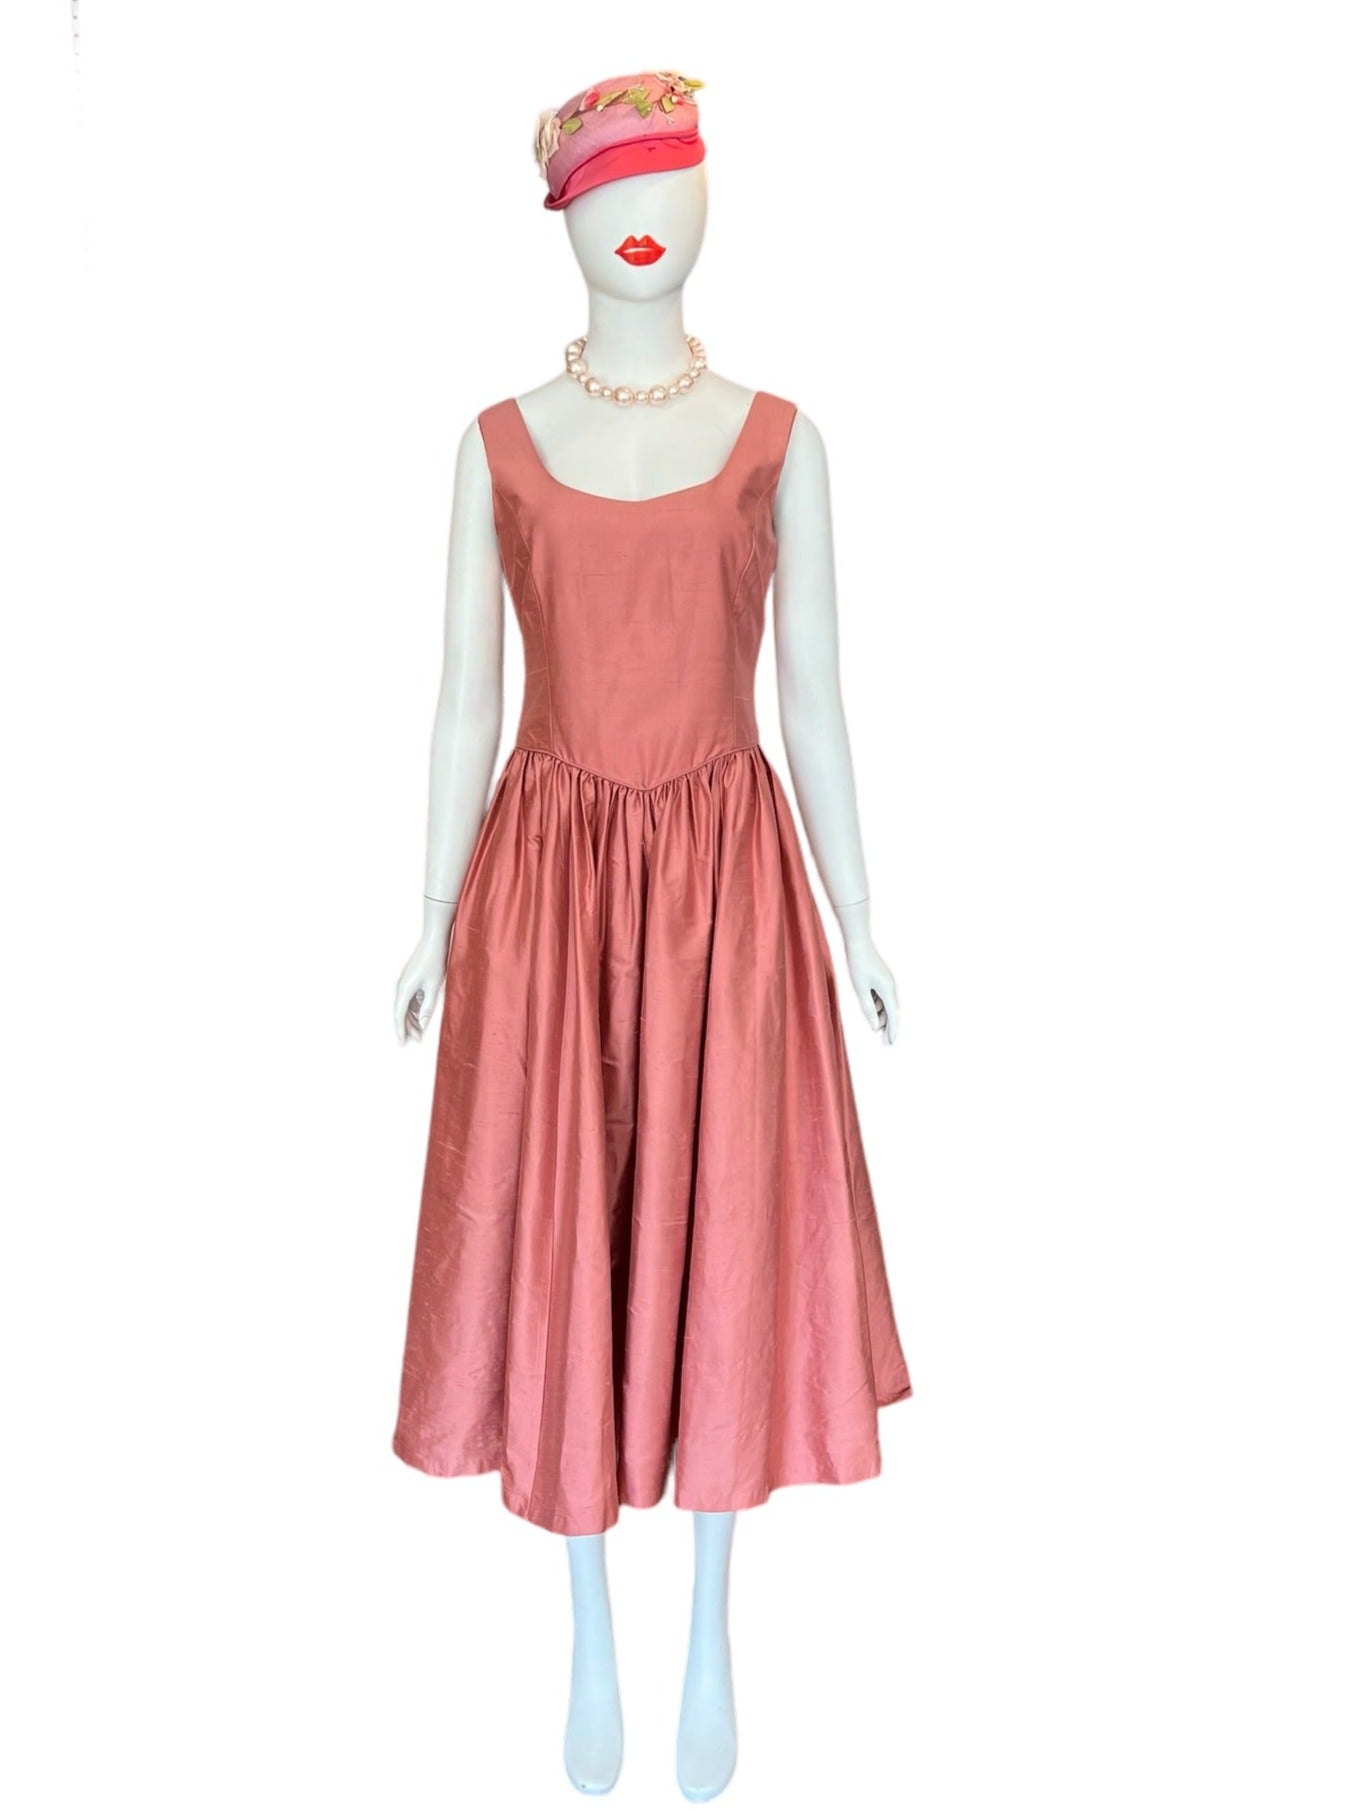 VINTAGE LAURA ASHLEY PARTY DRESS IN DUSTY ROSE FOR WOMEN 100% RAW SILK